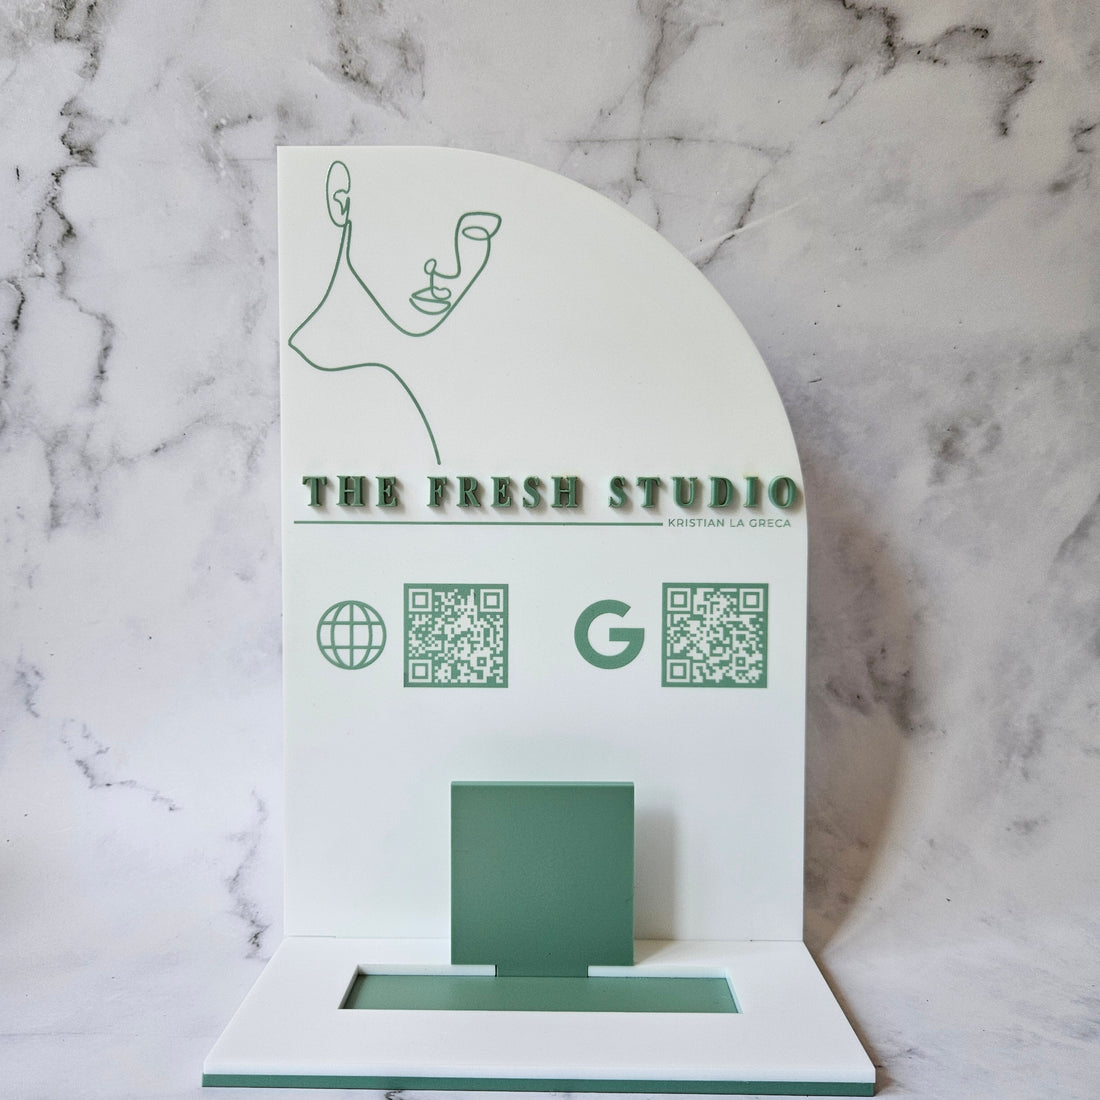 QR Code SIgn with cosmetic clinic business logo in white and sage green acrylic with QR Codes and Business Card Holder in Half Arch